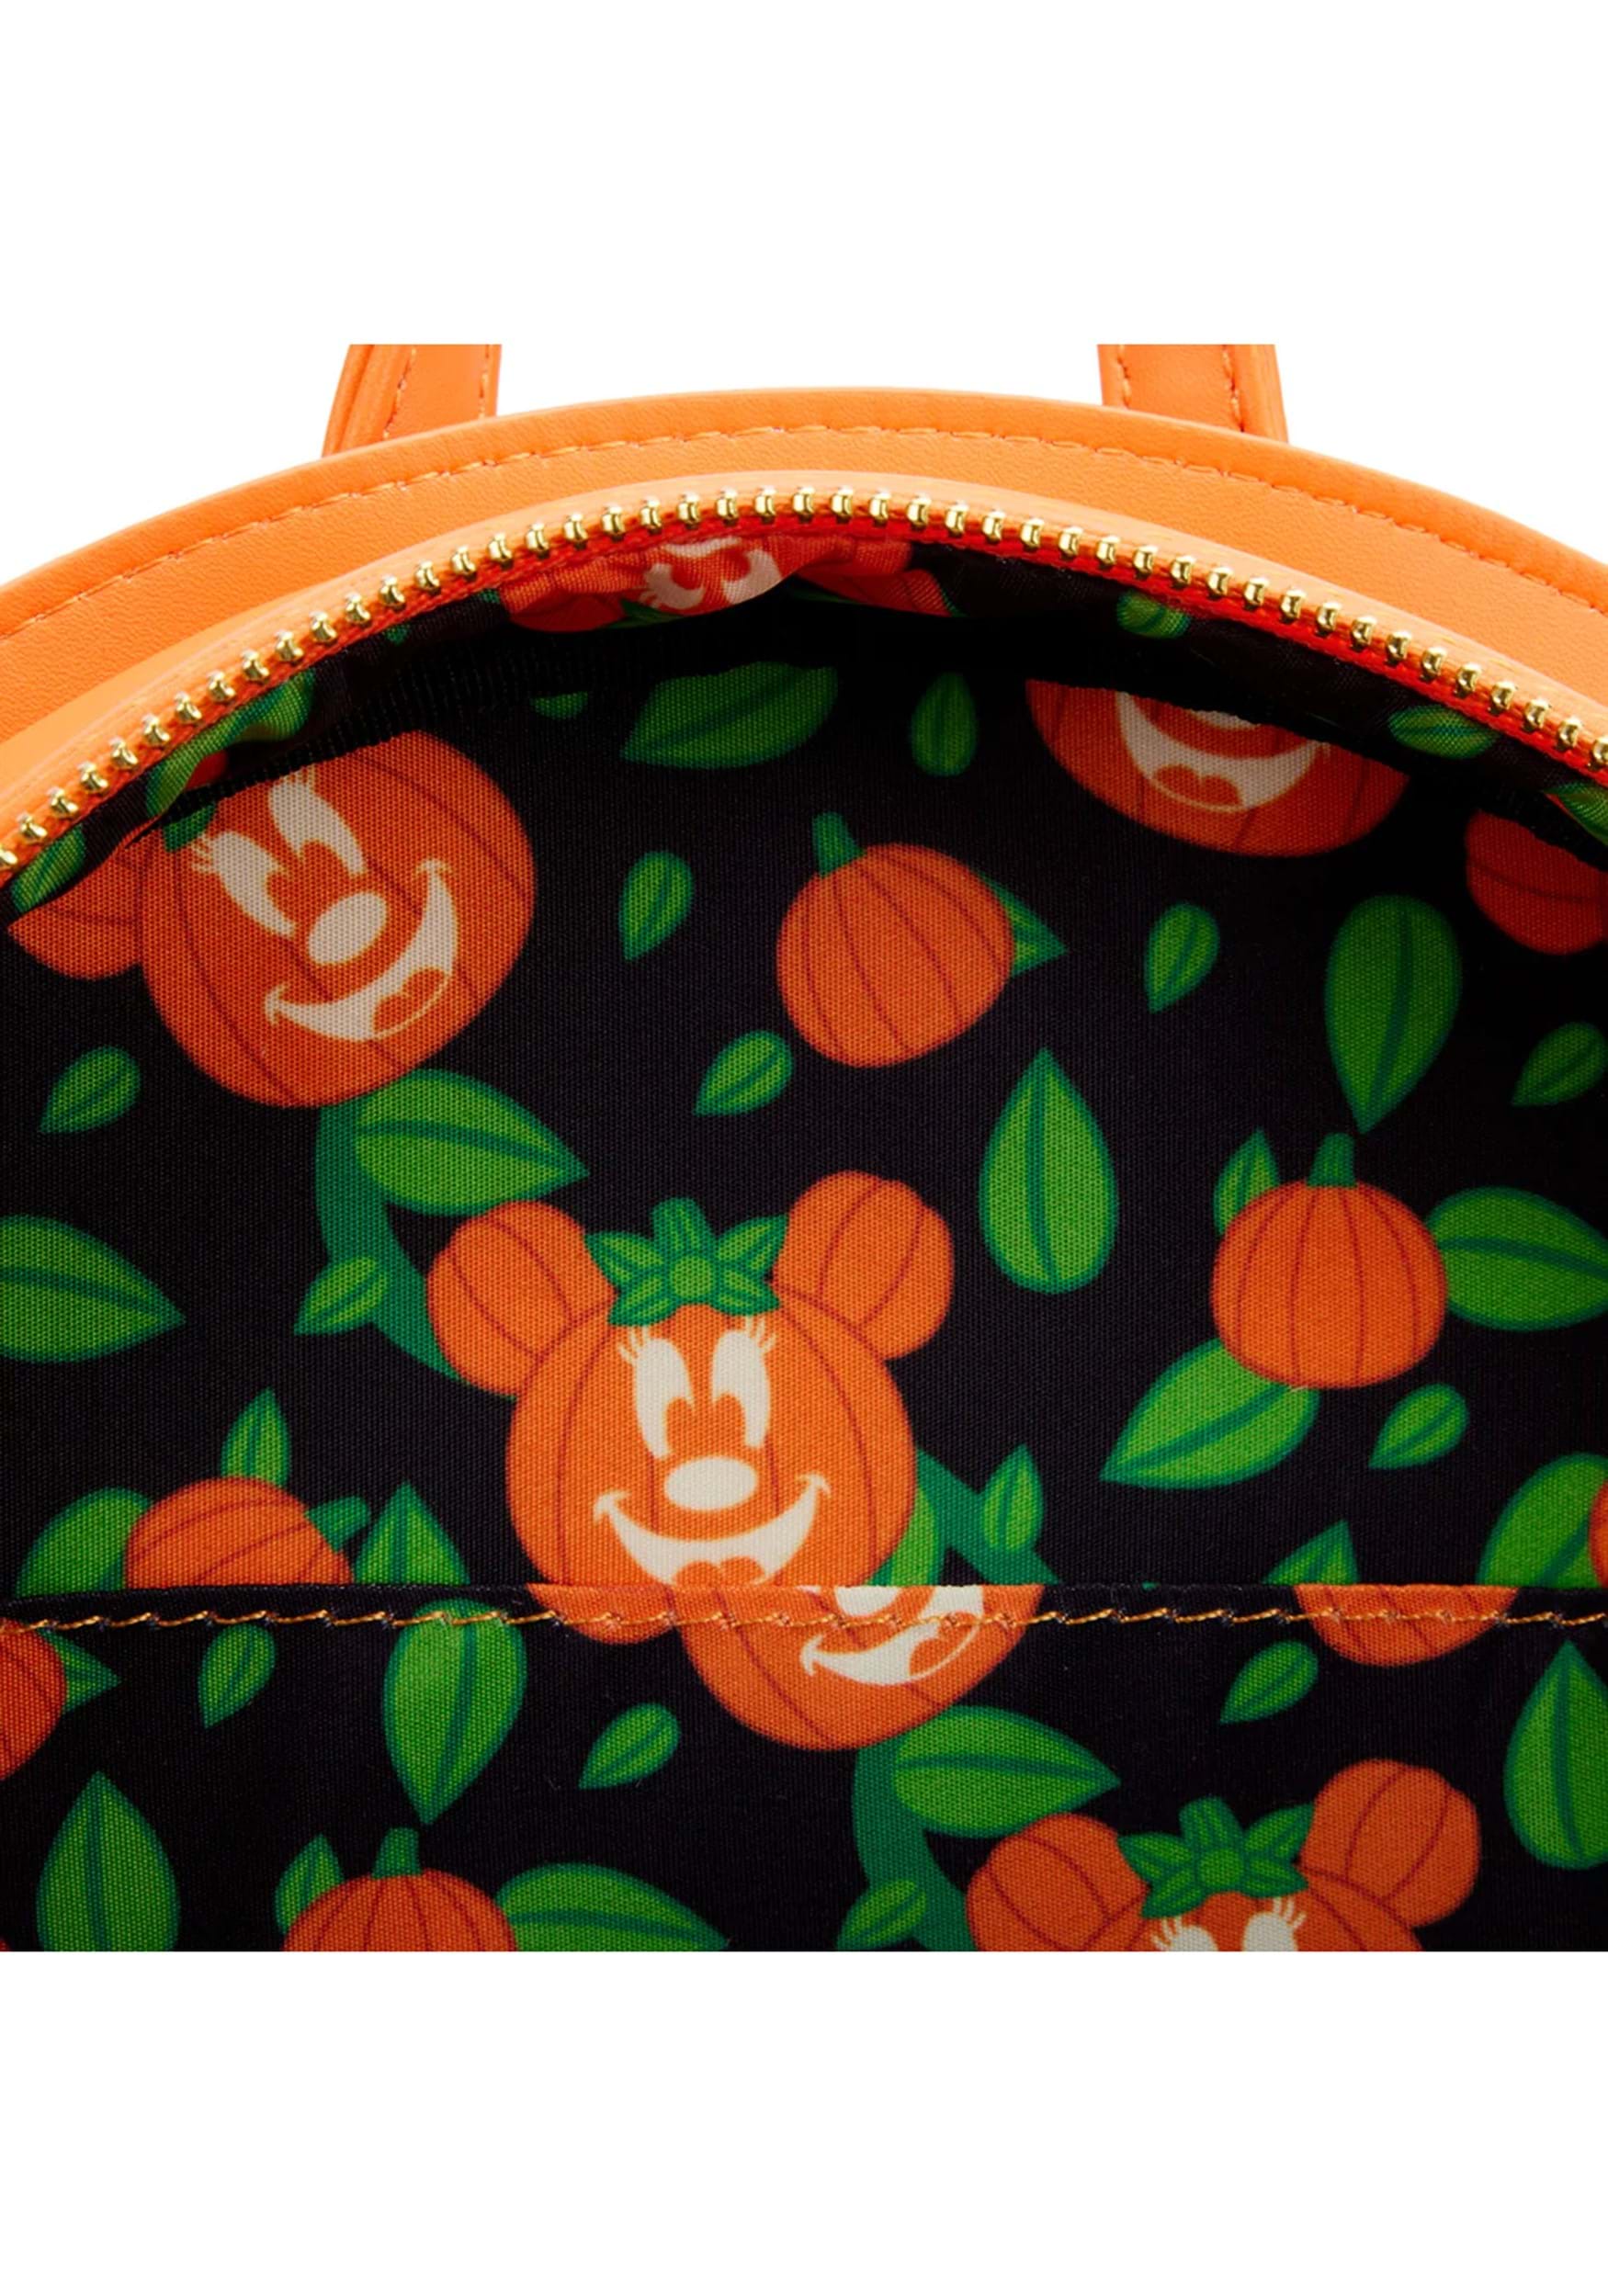 Buy Mickey Mouse Pumpkin Light Up Mini Backpack at Loungefly.